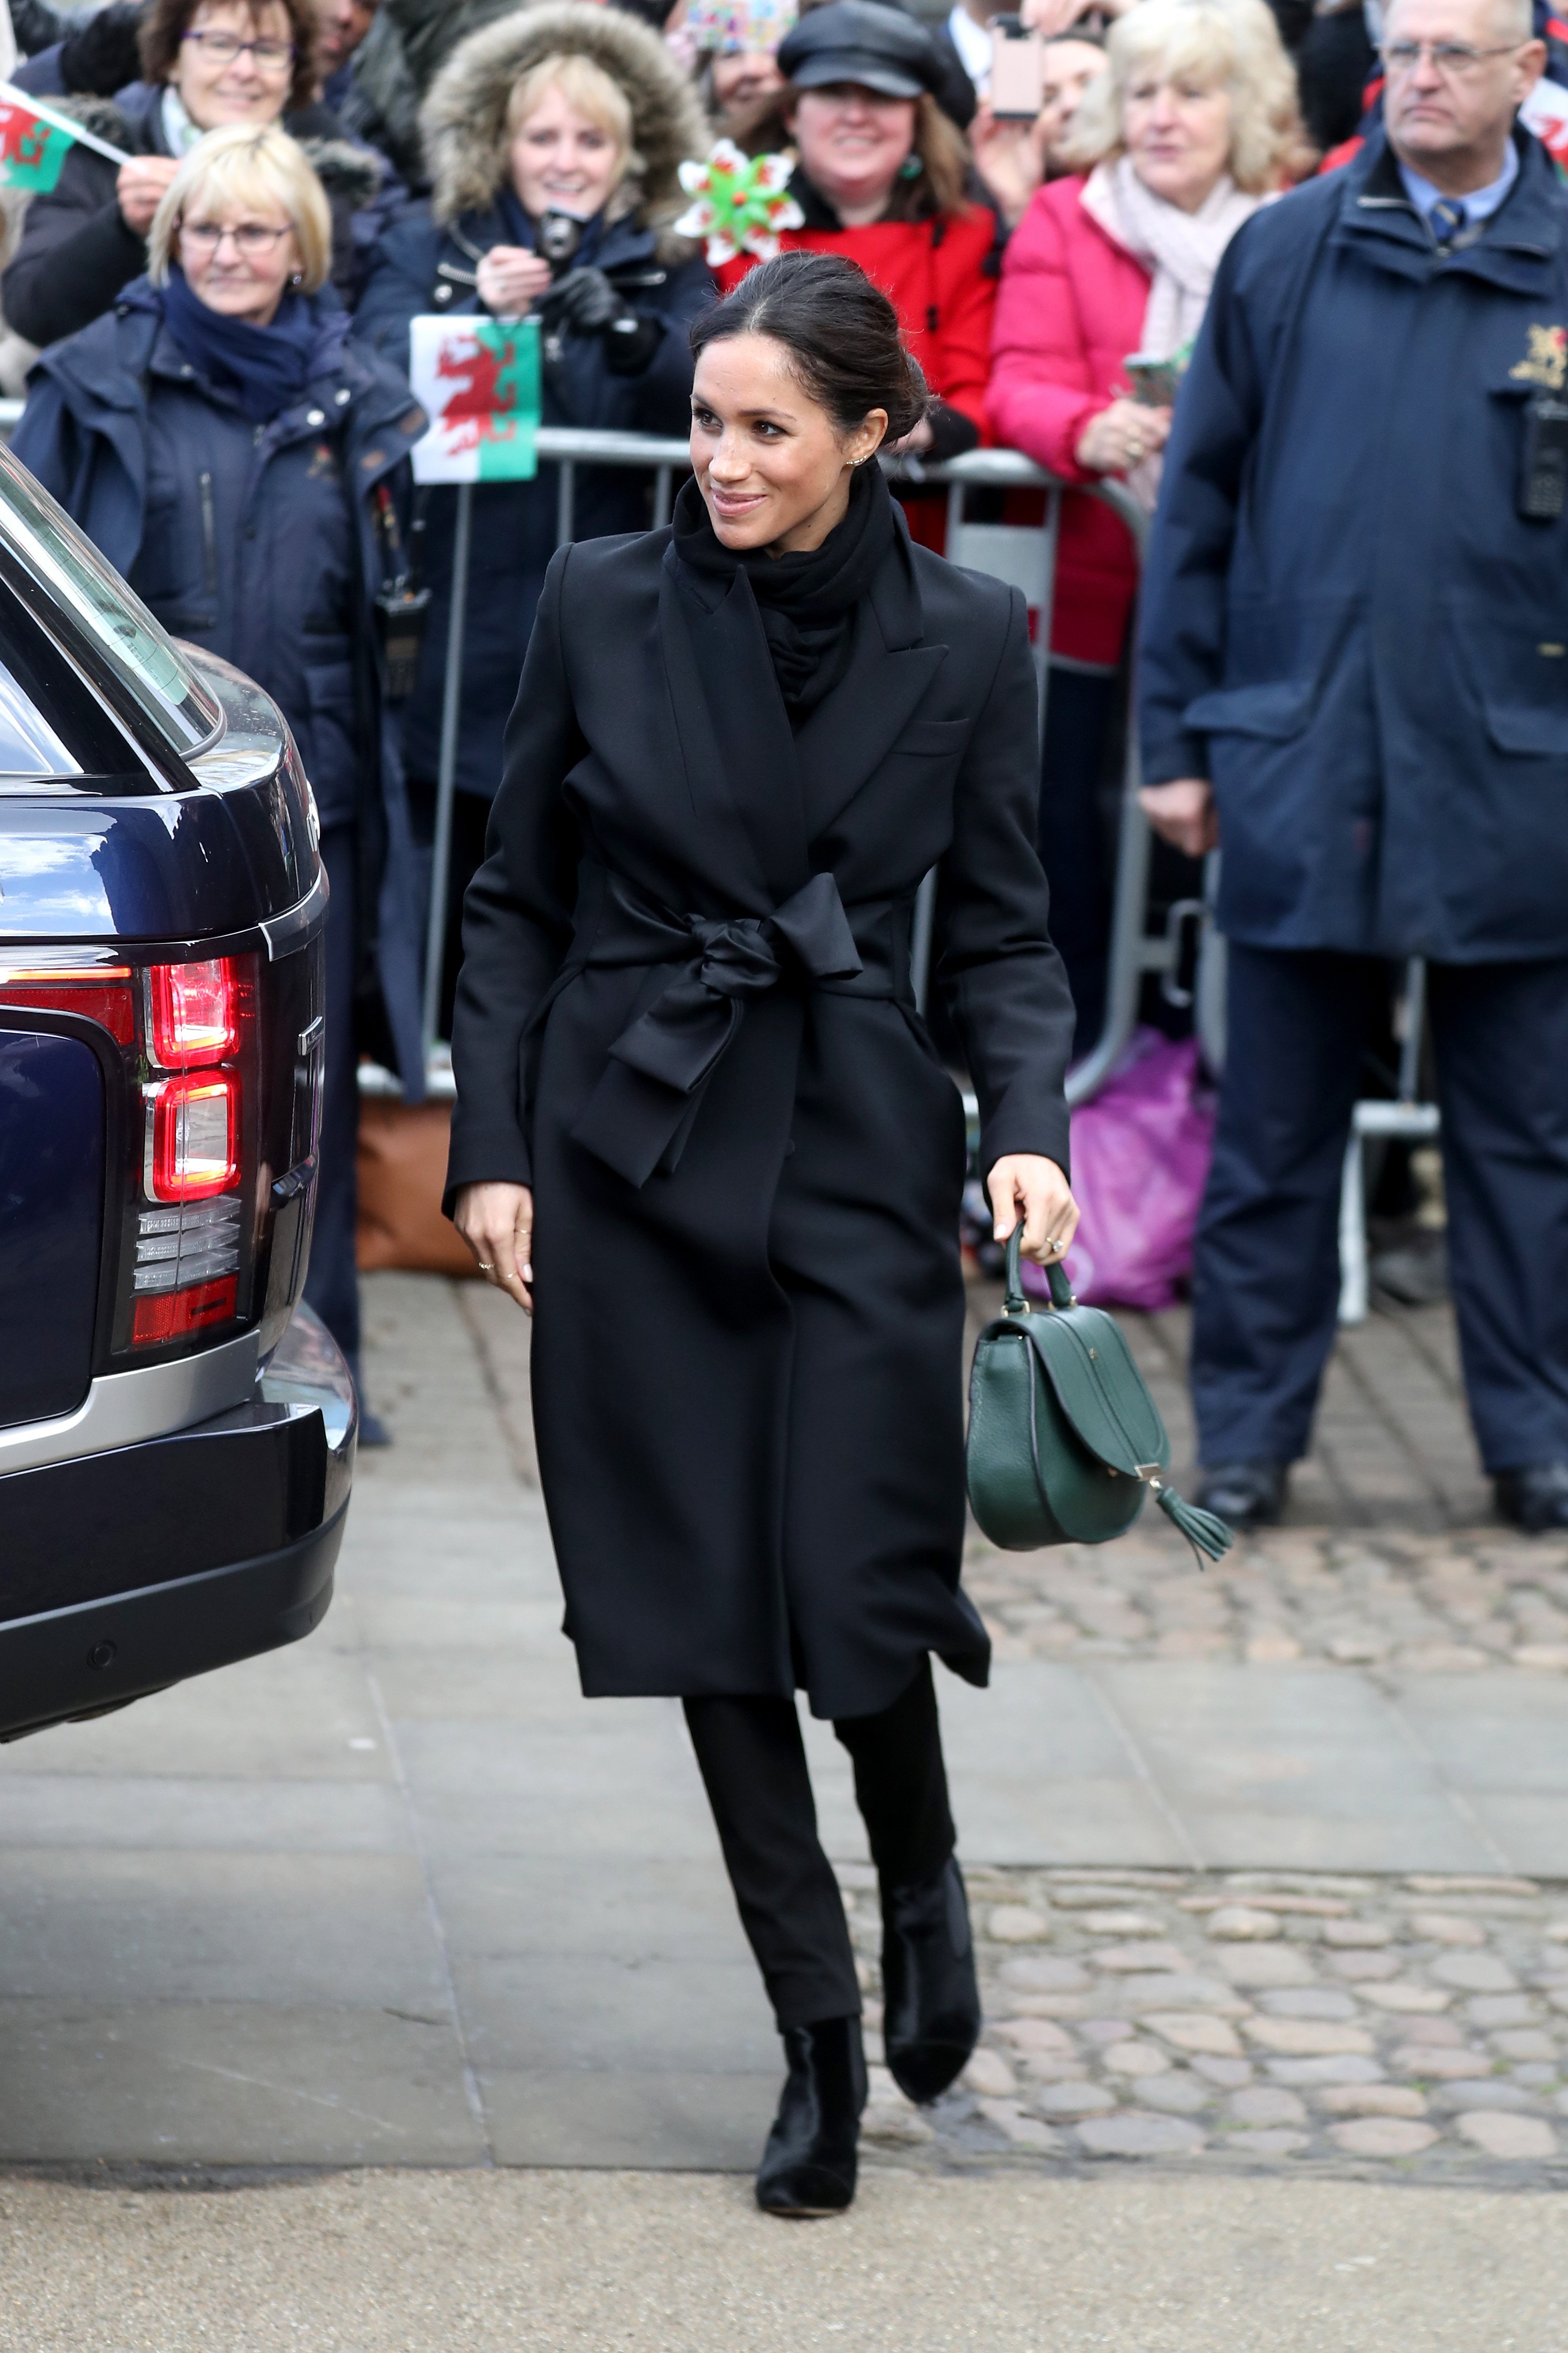 Meghan Markle arrives to a walkabout at Cardiff Castle on Jan. 18, 2018 in Cardiff, Wales | Photo: Getty Images